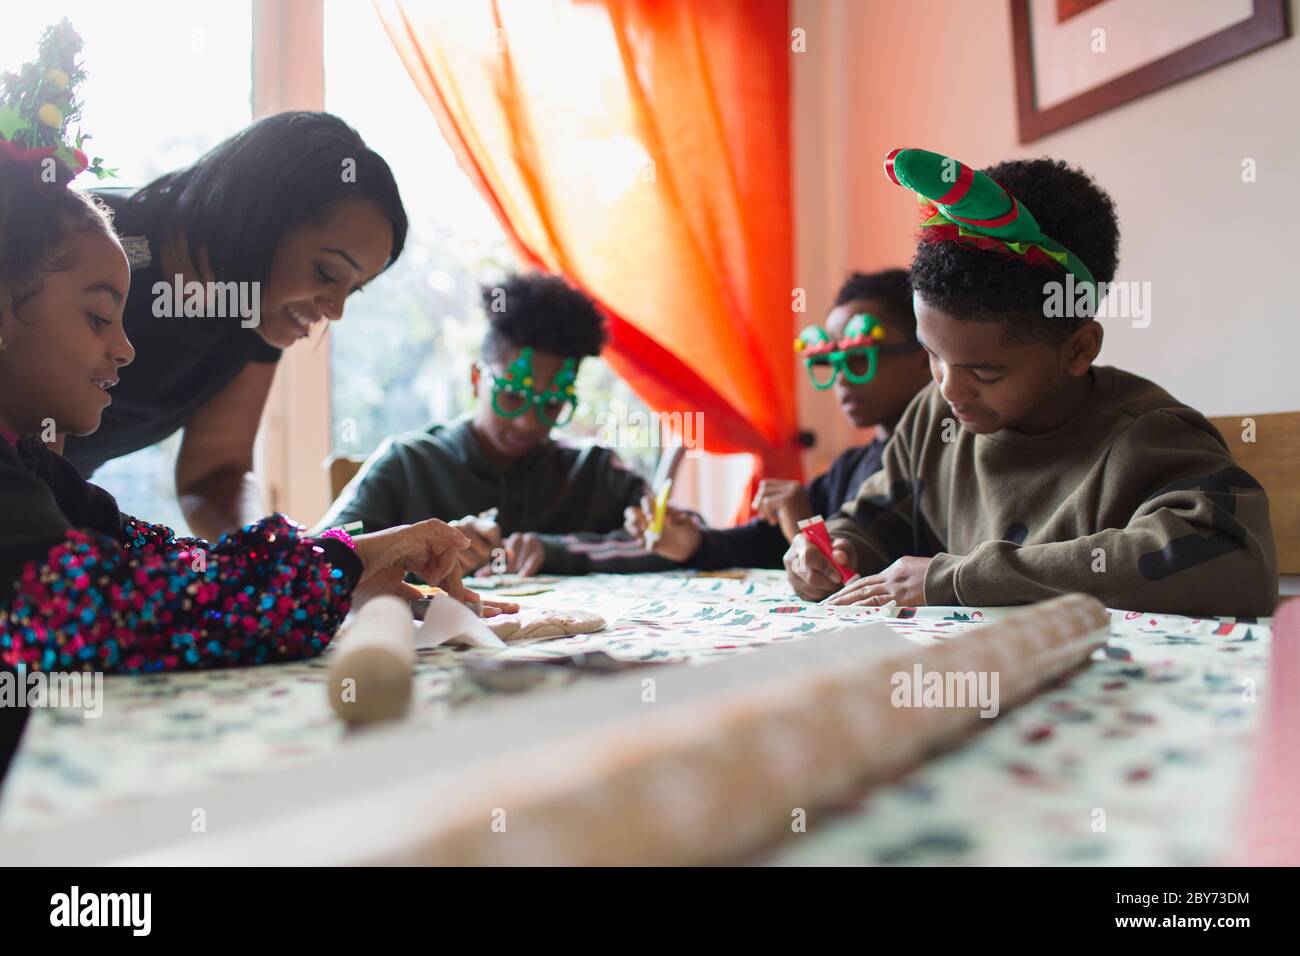 Family decorating Christmas cookies at table Stock Photo